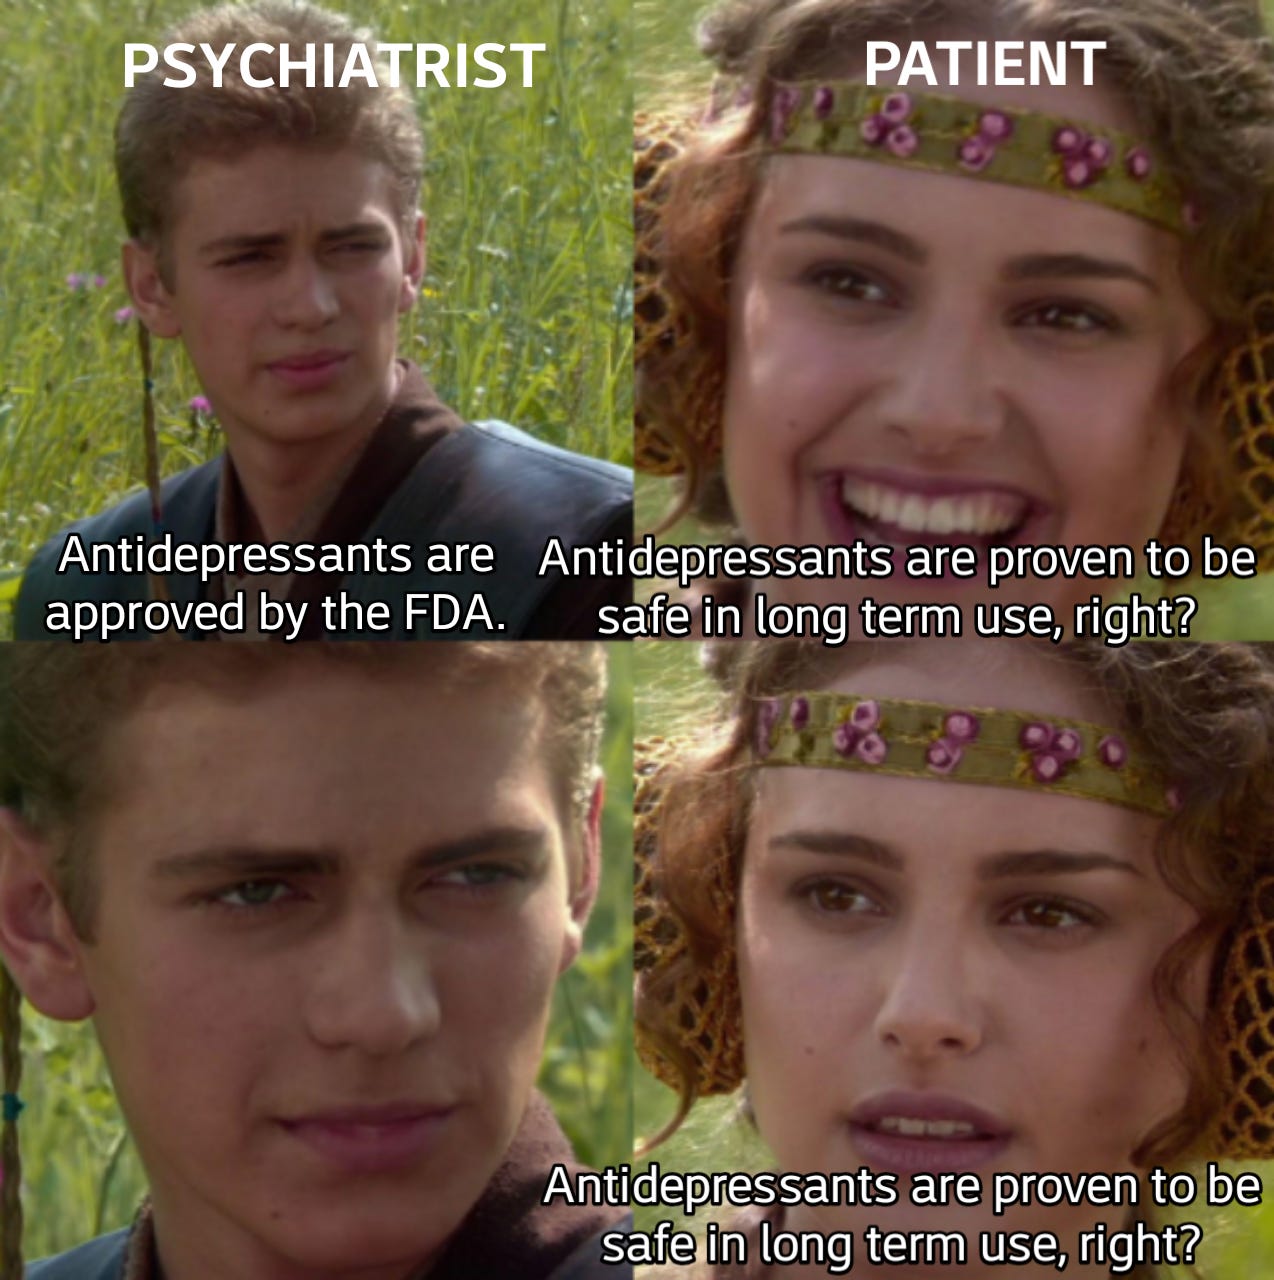 Four frames from star wars, the first on the upper left "Psychiatrist: Antidepressants are approved by the FDA" the next on the right labeled "Patient: Antidepressants are proven to be safe in long term use, right?" then it is is repeated.